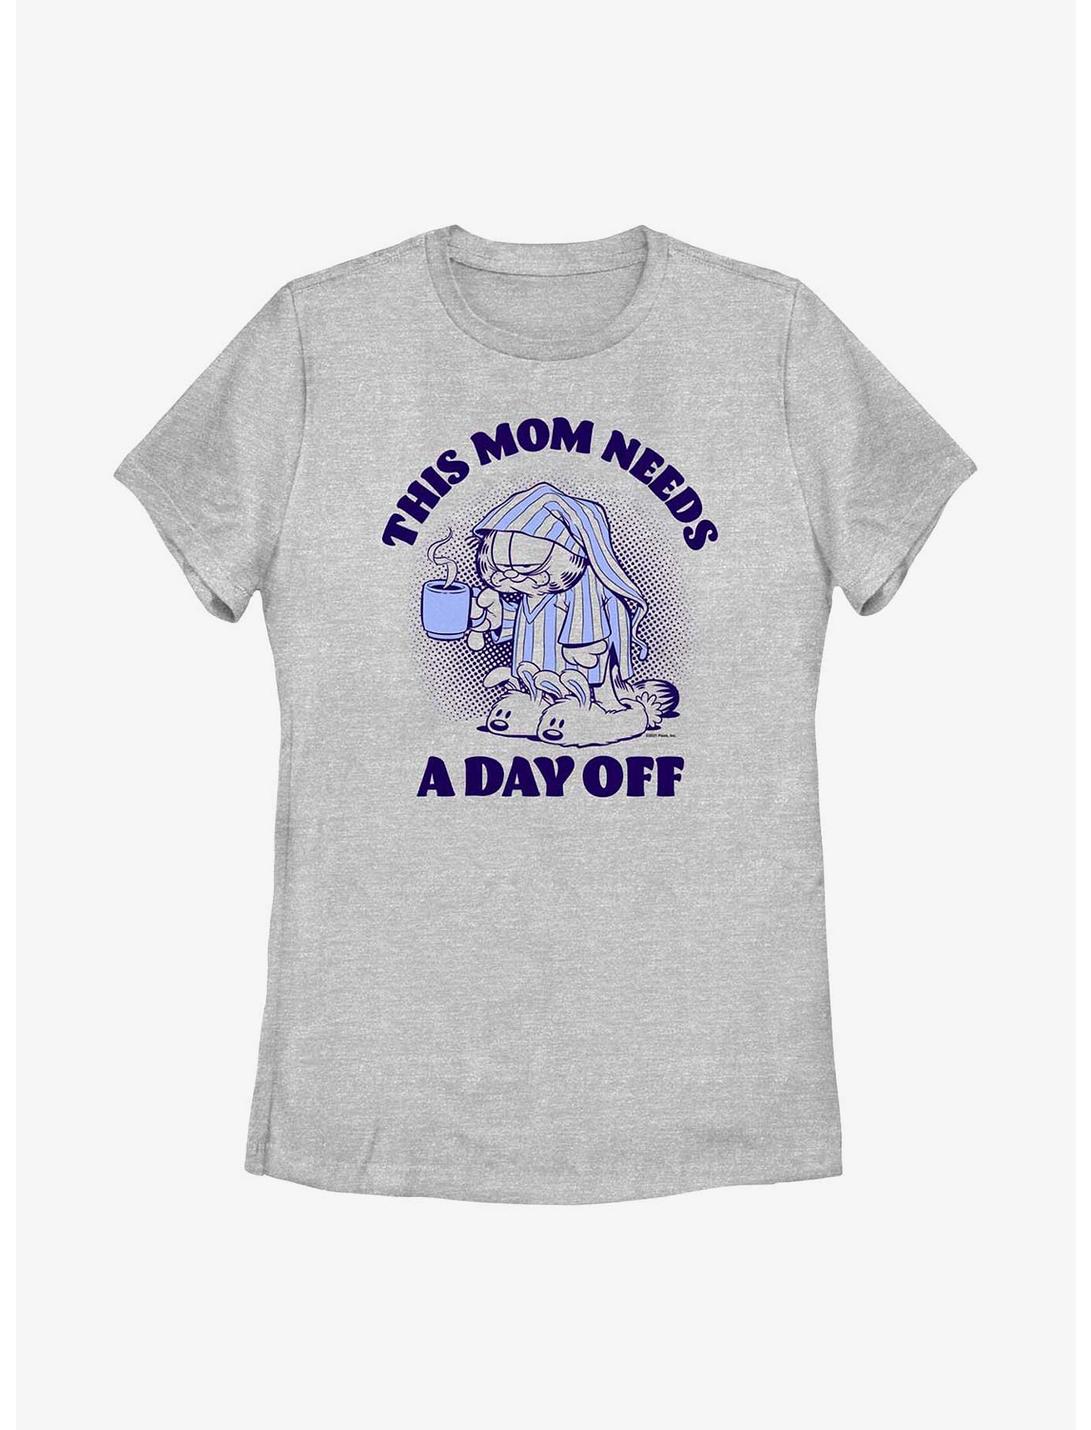 Garfield This Mom Needs A Day Off Women's T-Shirt, ATH HTR, hi-res